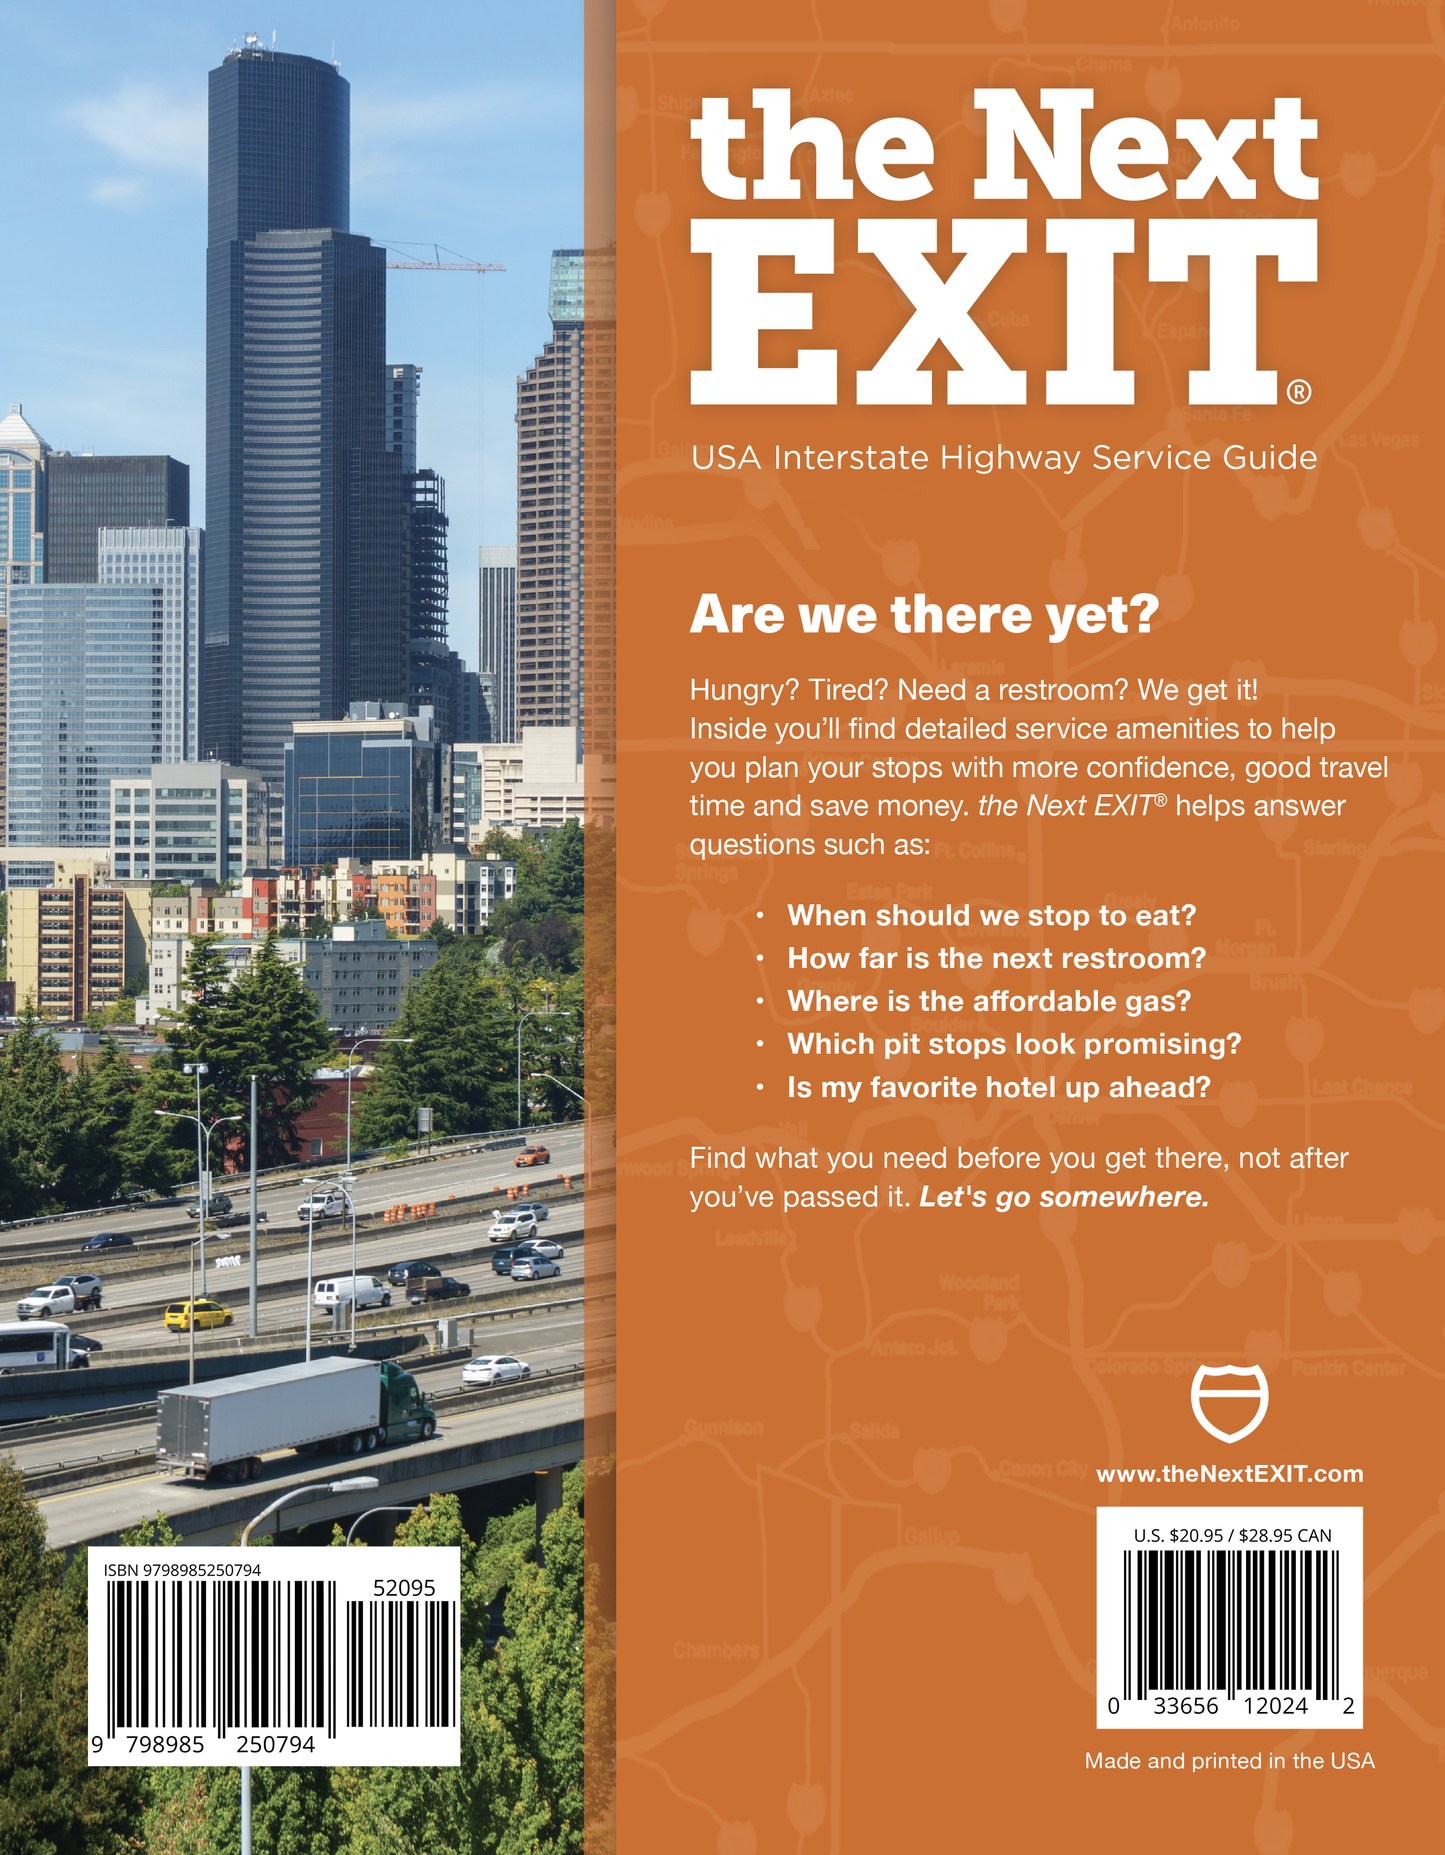 the Next EXIT Book 2024 Edition